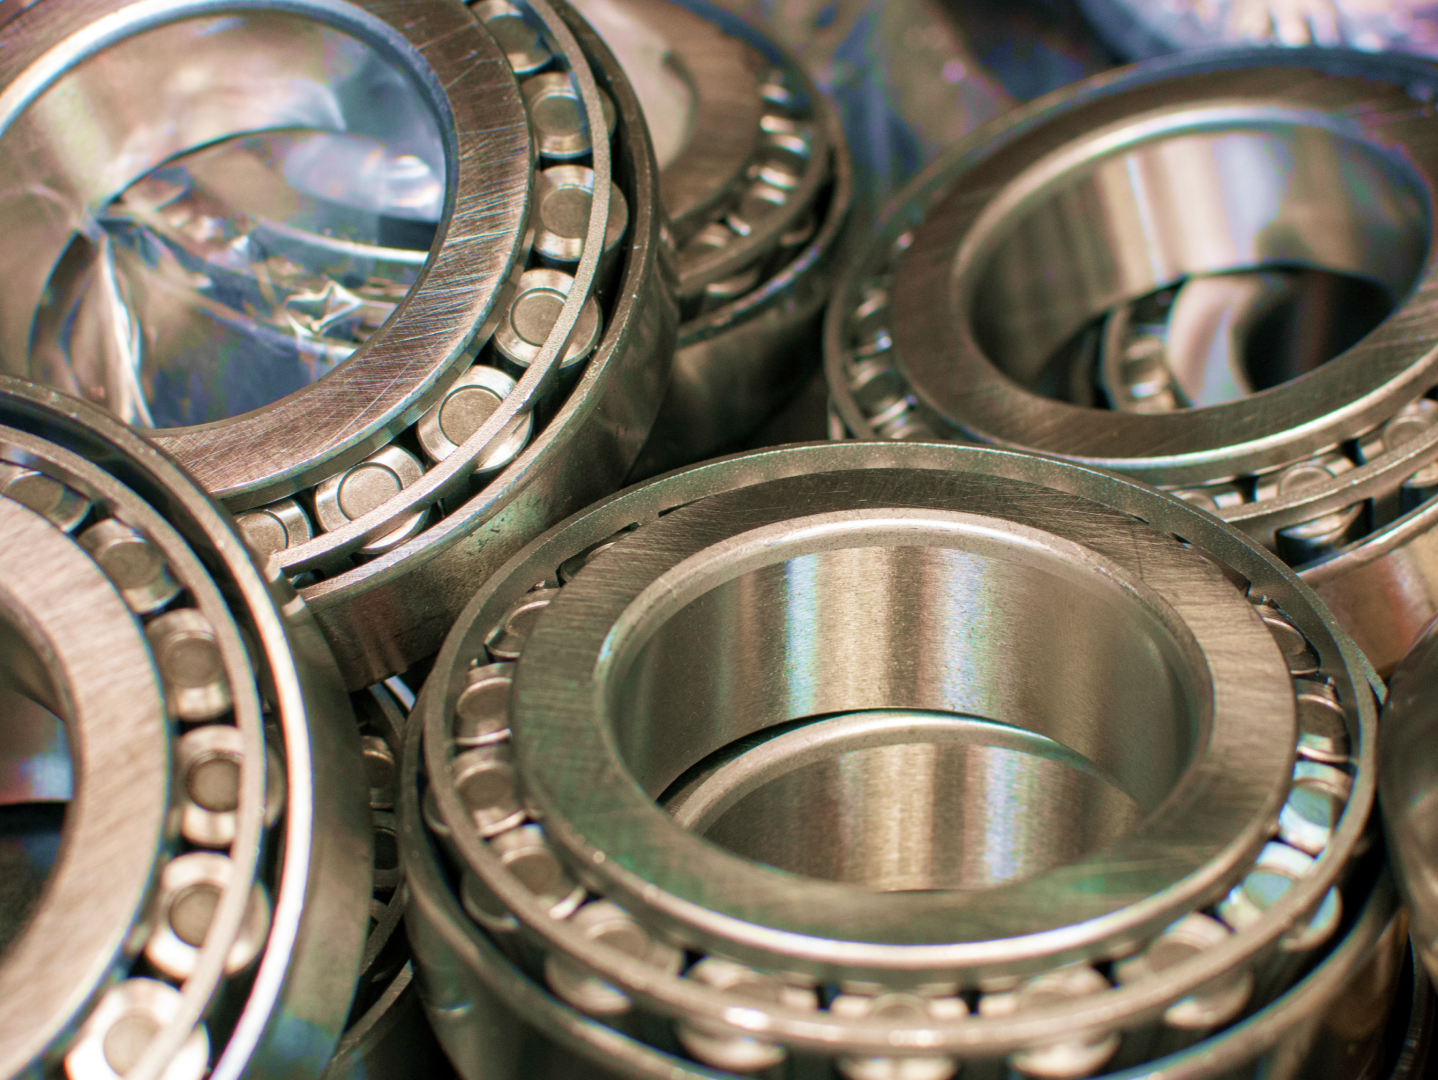 Quality characteristics - What characterizes quality in roller bearings?